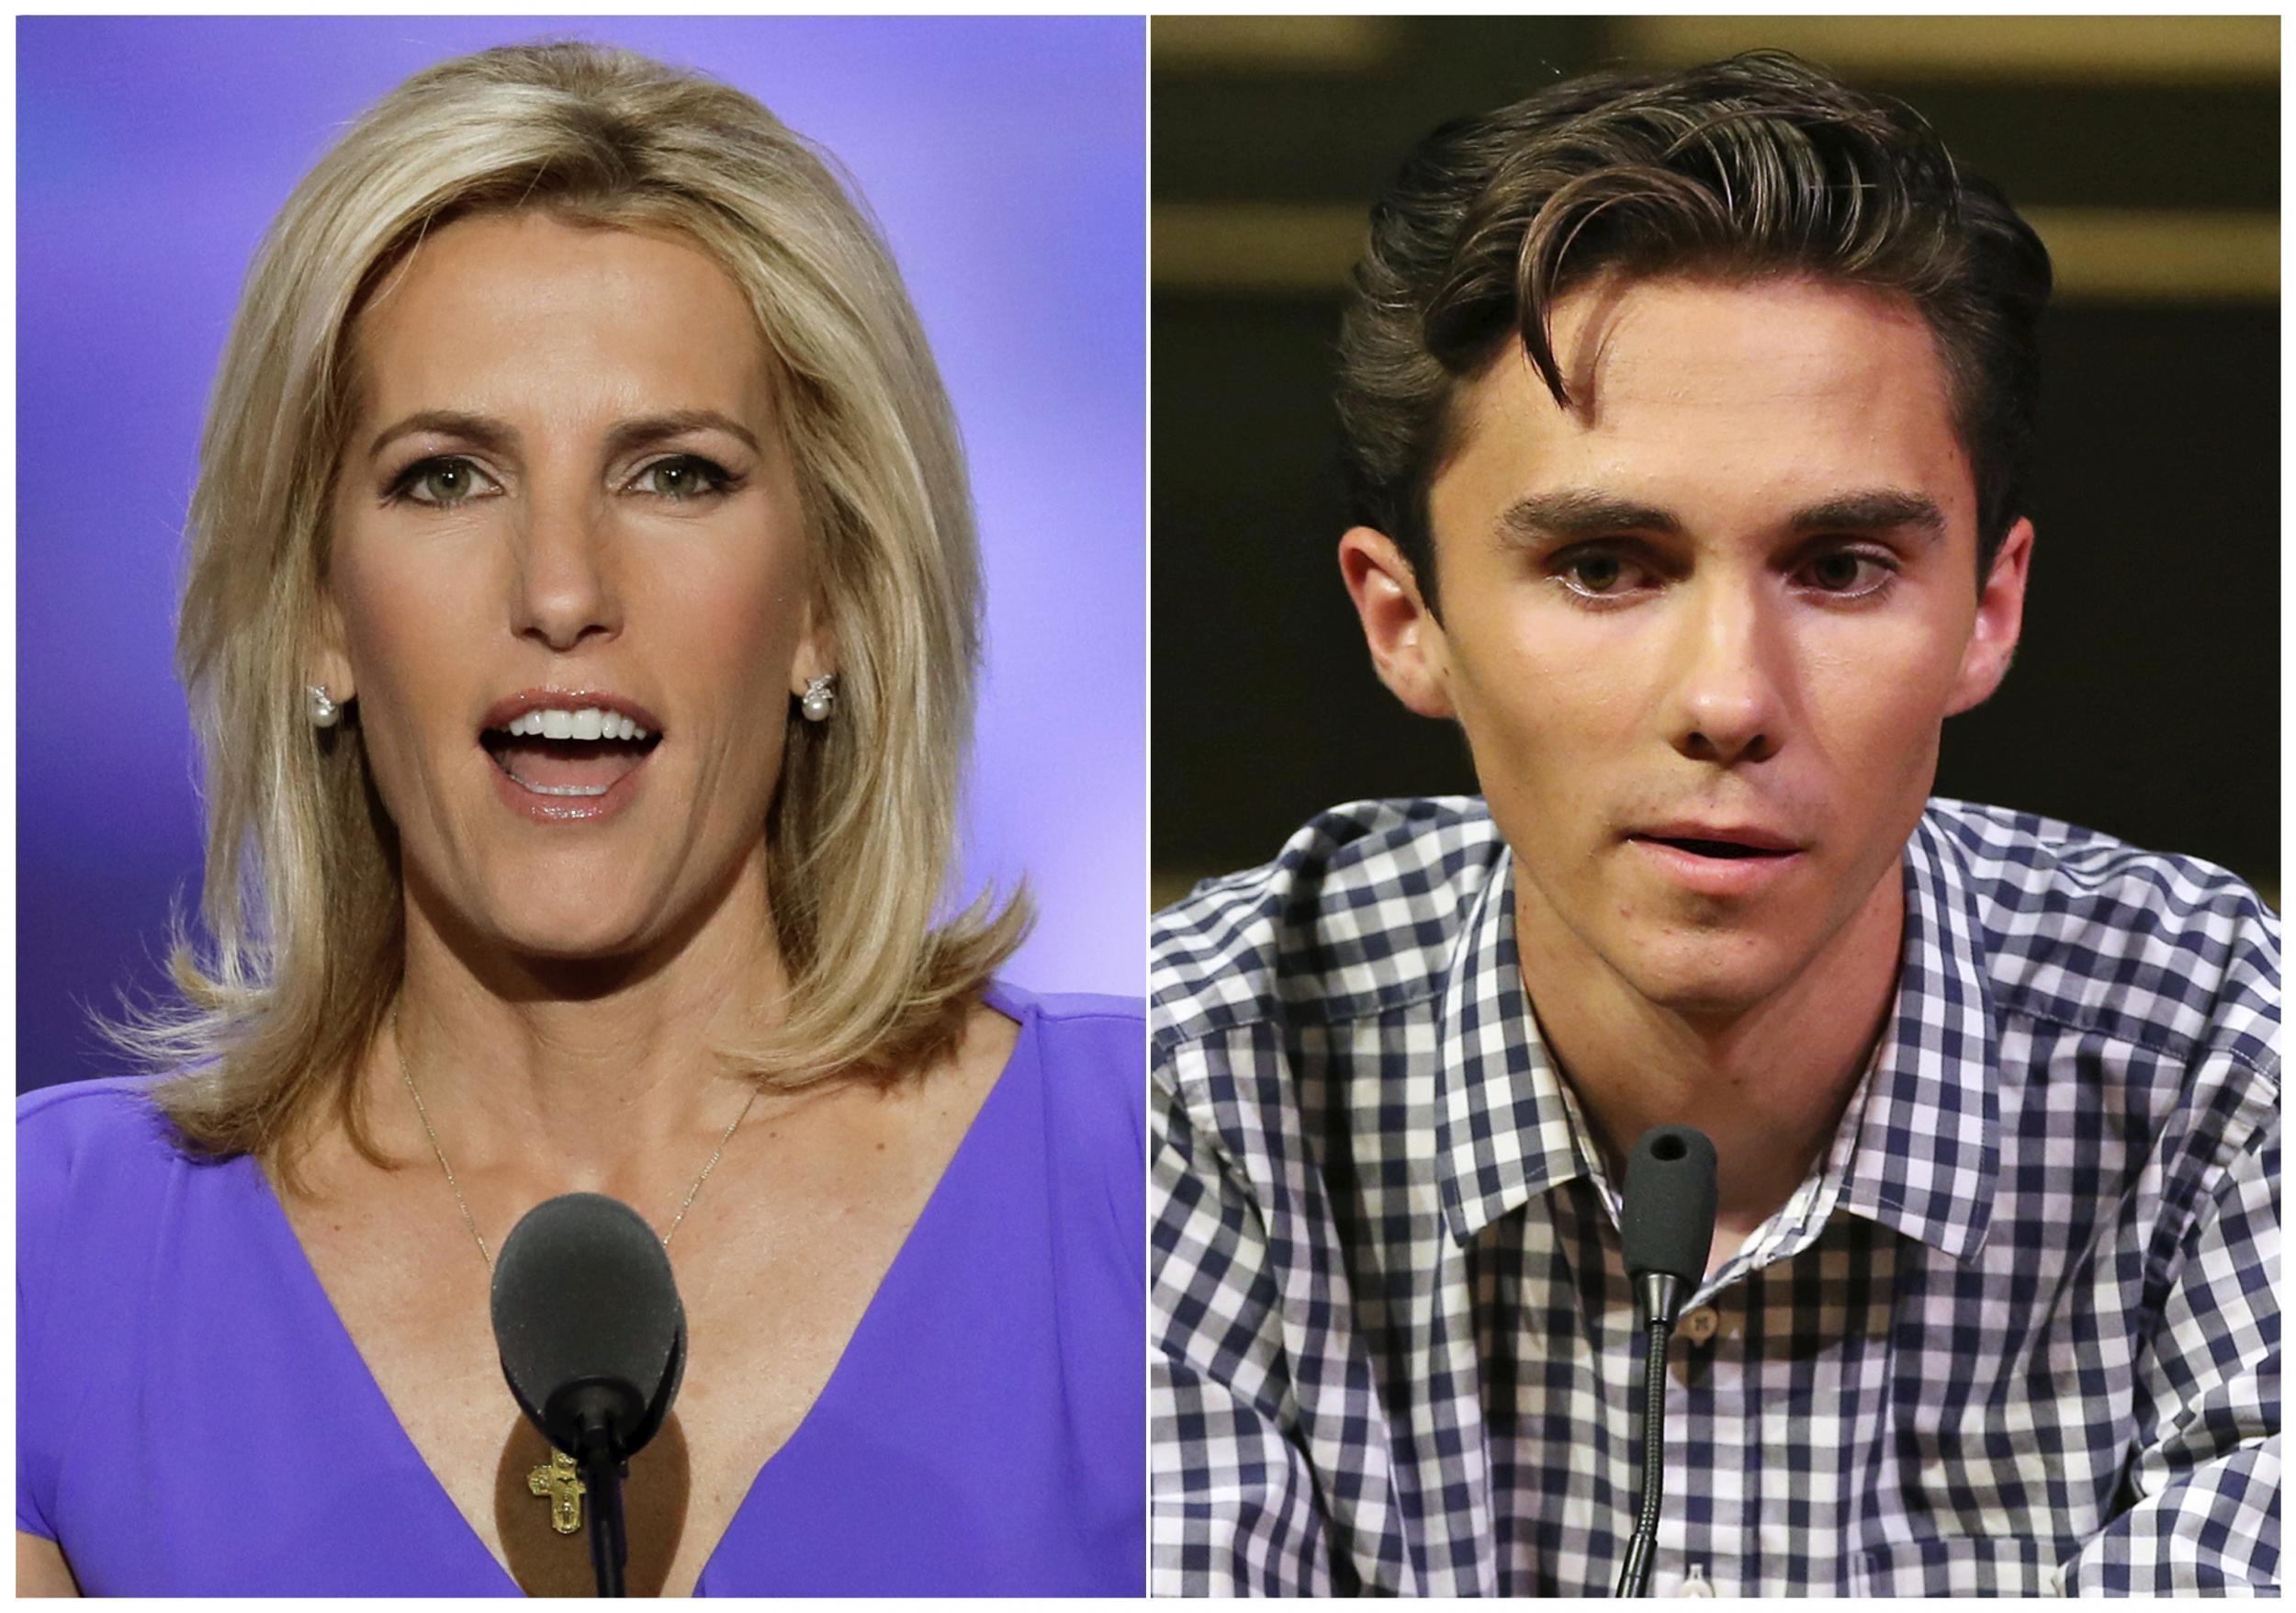 I watched Laura Ingraham's show on Fox News. This is why she isn't a